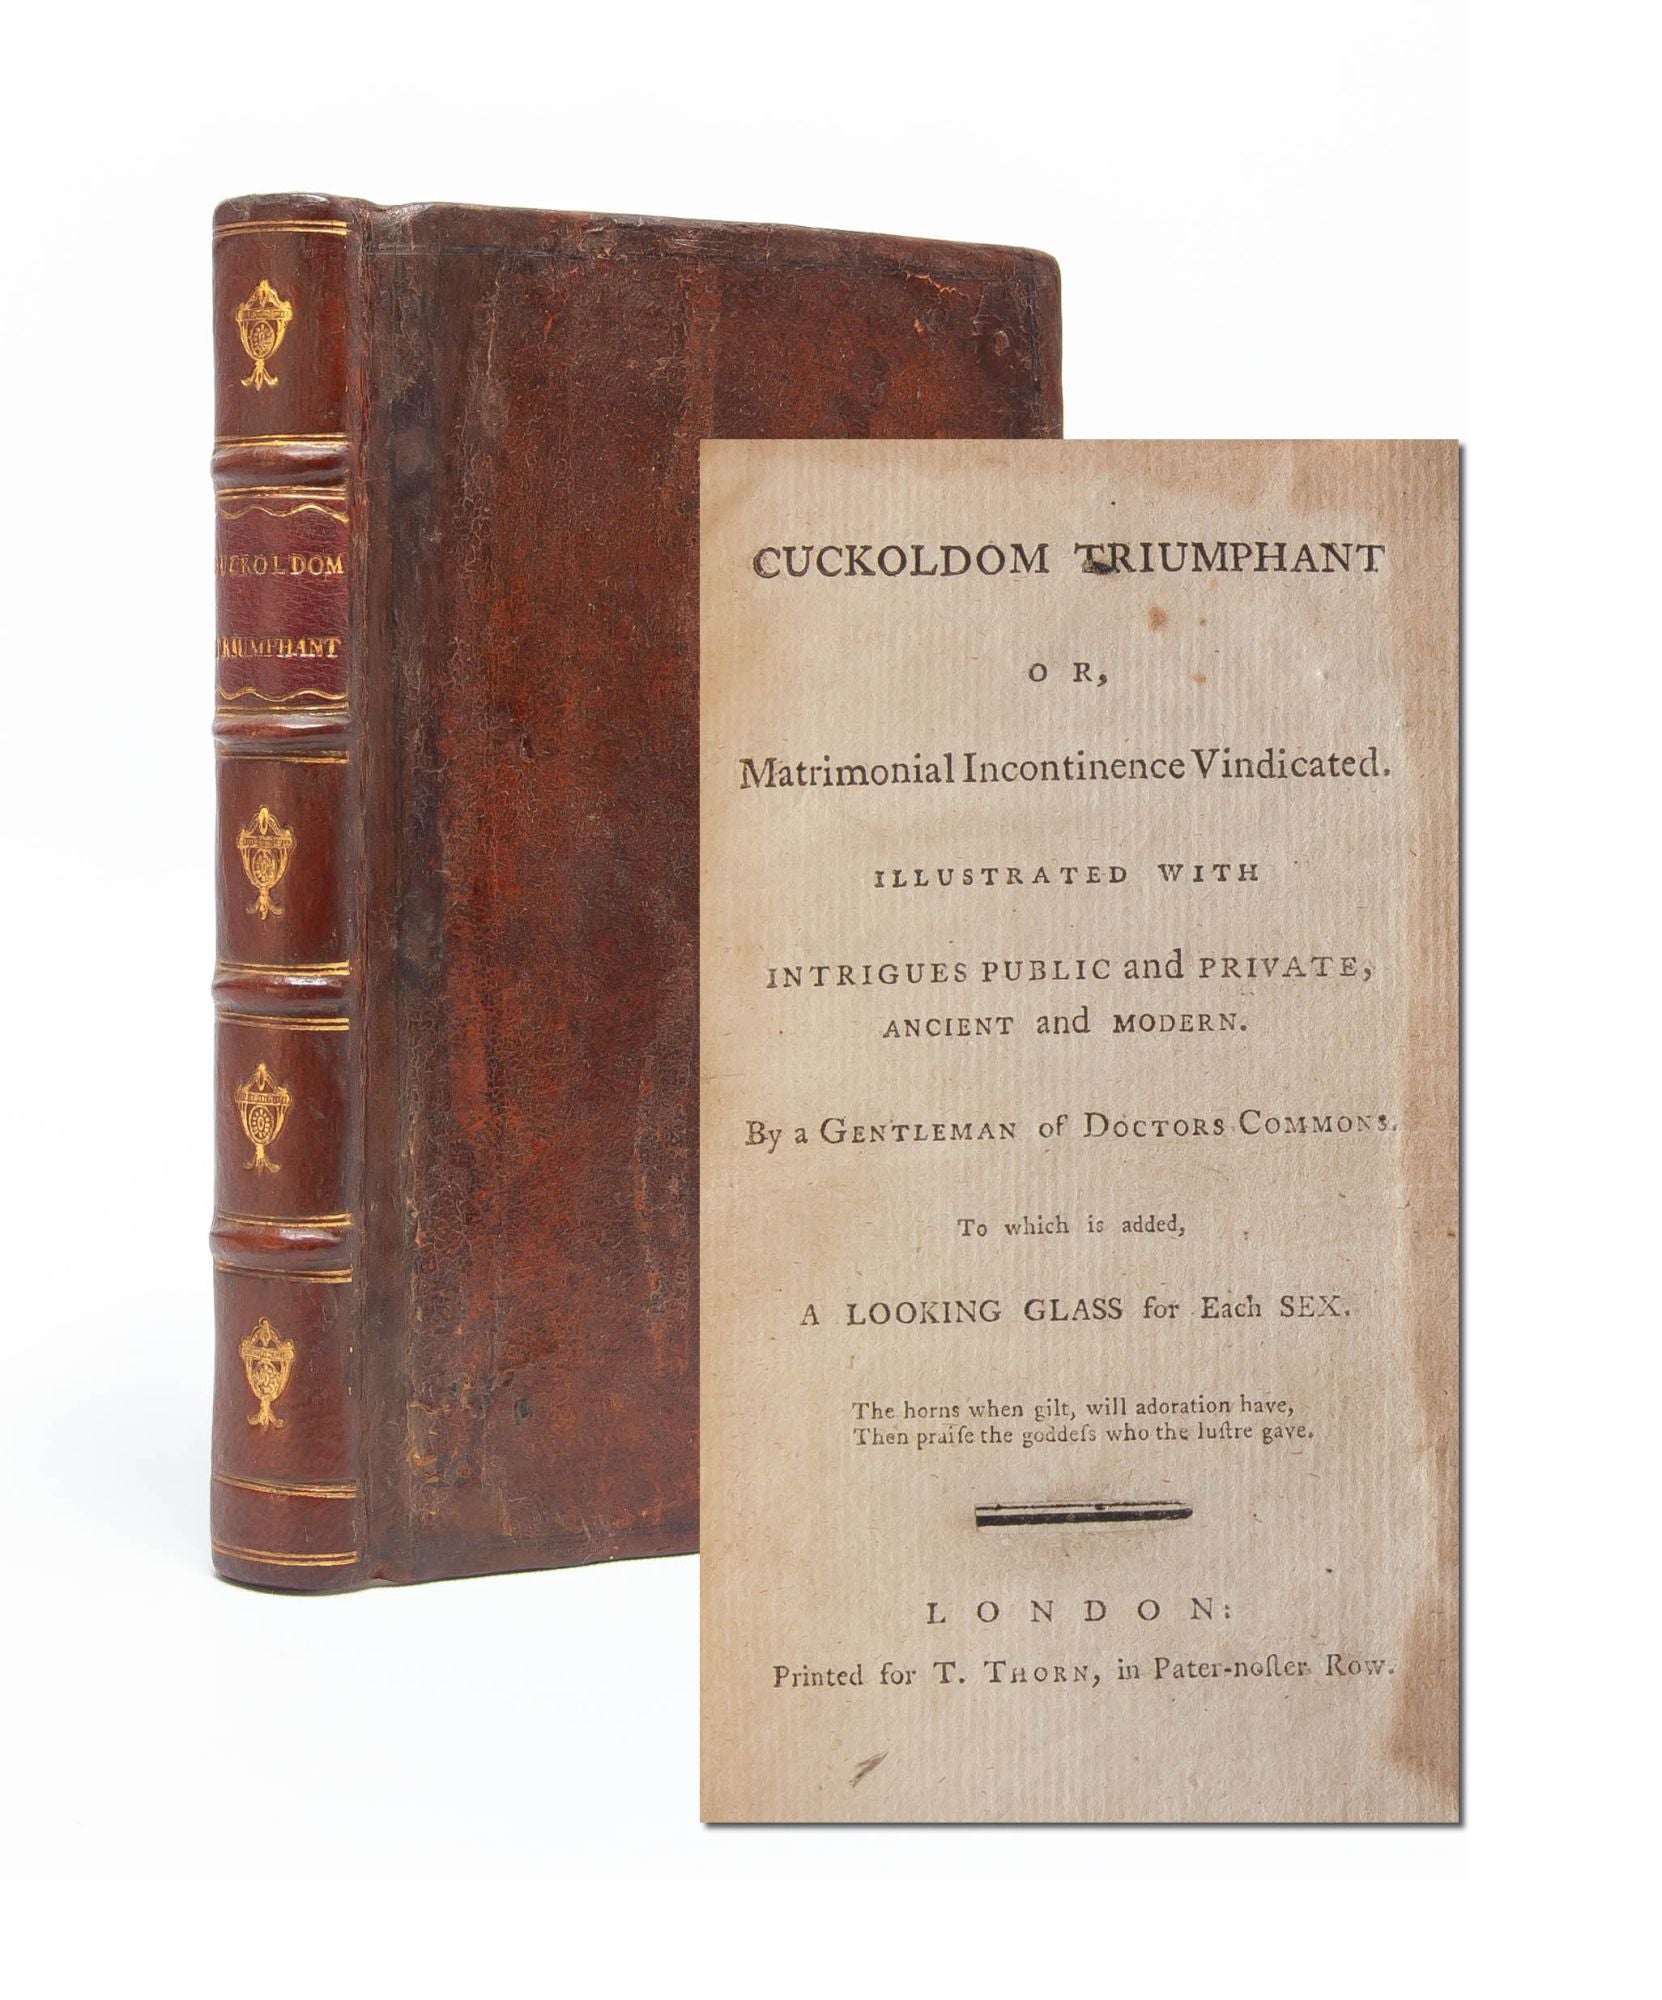 (Item #5080) Cuckoldom Triumphant; or, Matrimonial Incontinence Vindicated...To which is added A Looking Glass for Each Sex. Erotic Literature, A Gentleman of Doctors Commons, Cornuto.